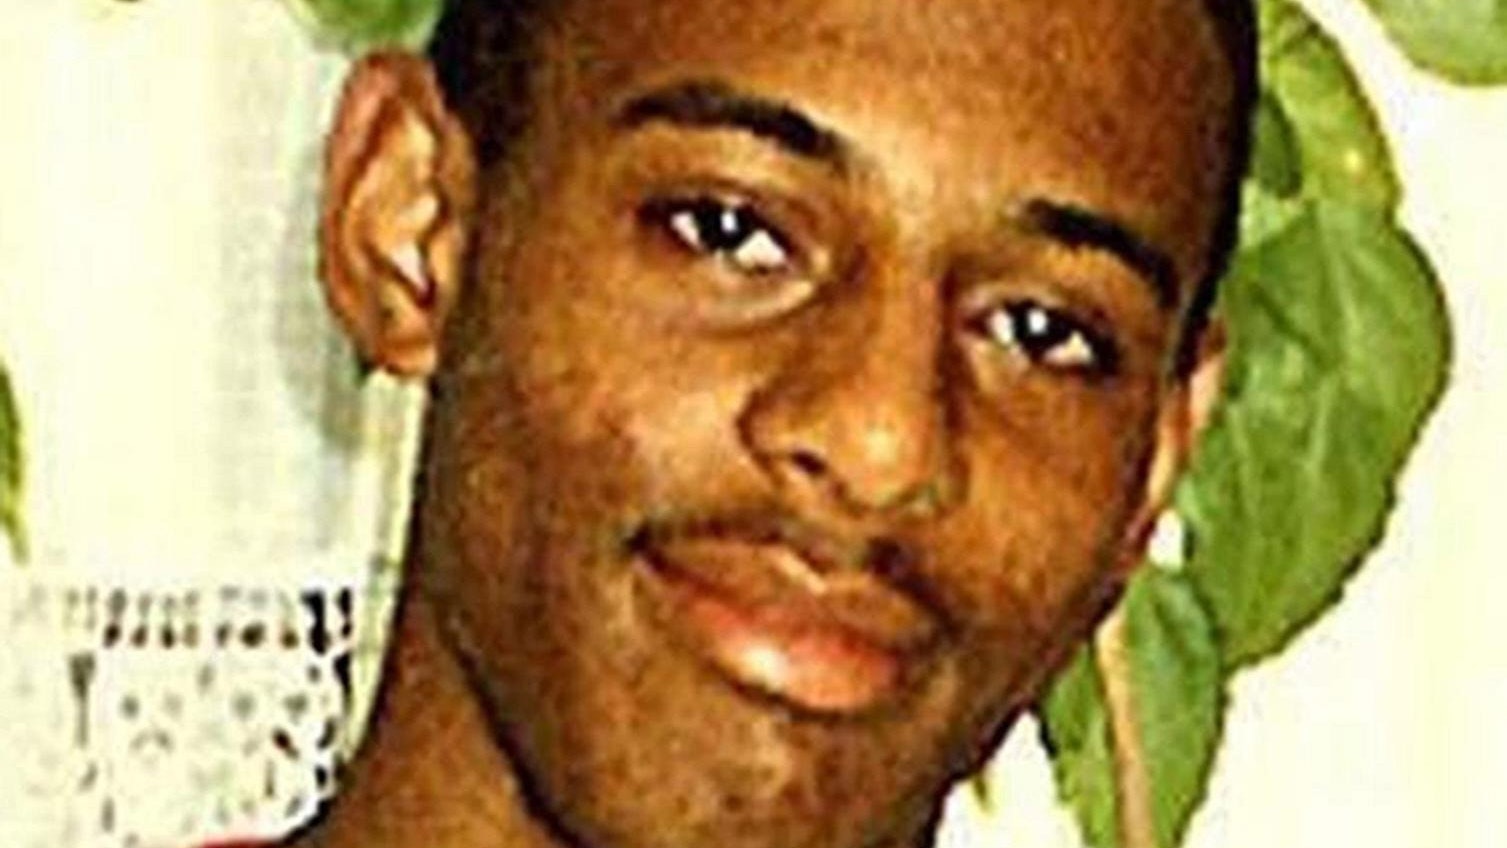 ‘No indication of corruption’ by former Stephen Lawrence detective, watchdog finds